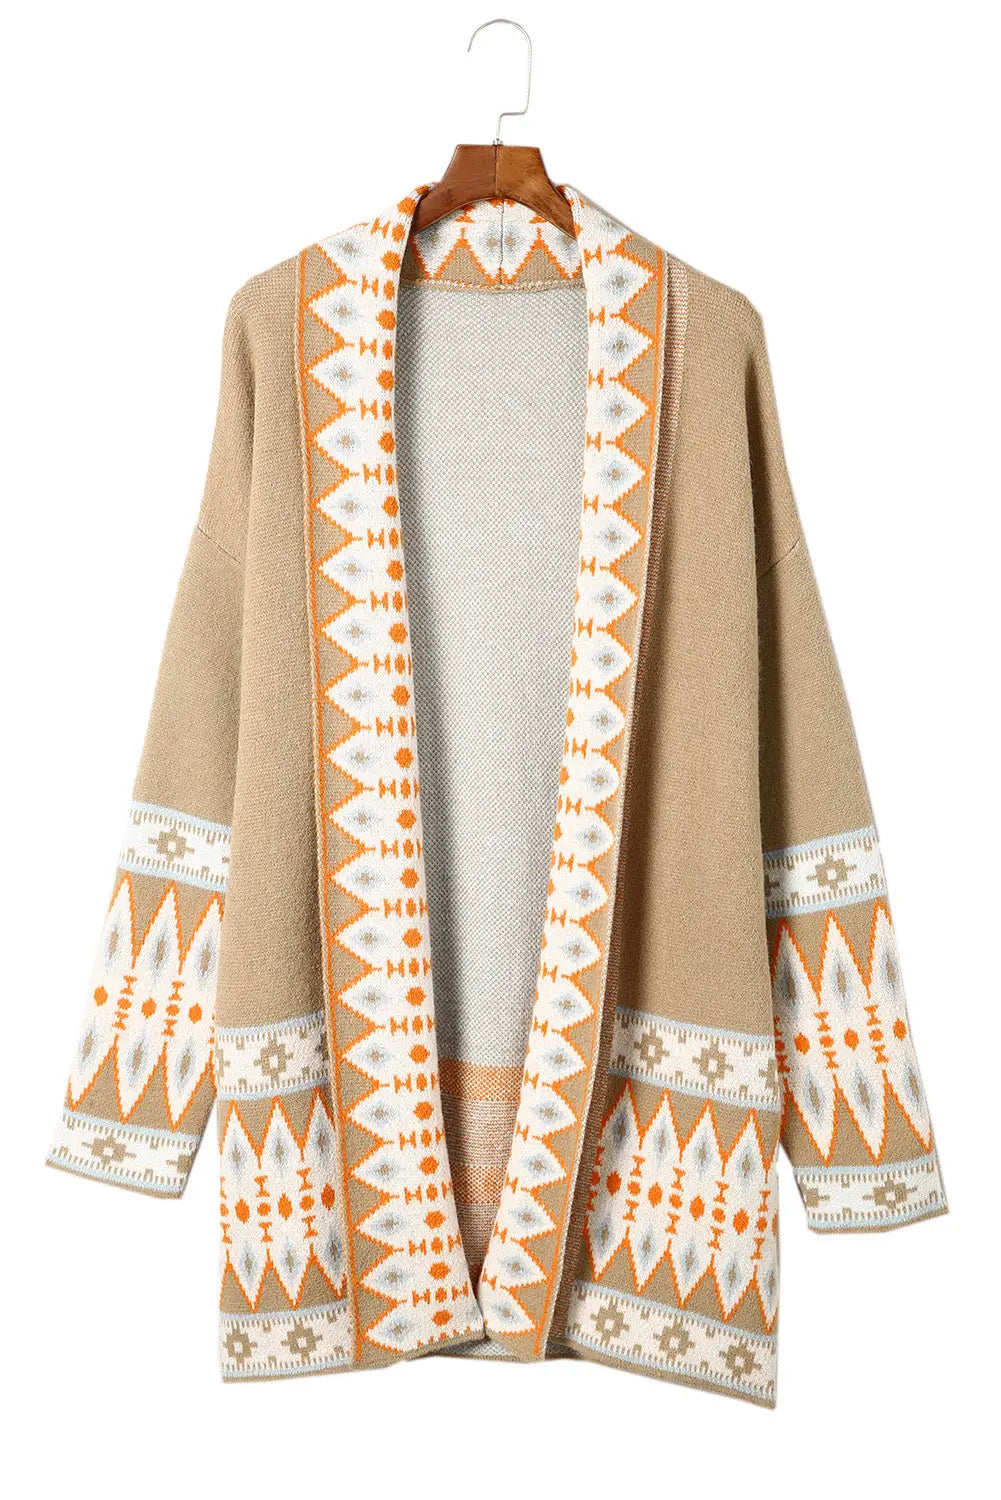 Aztec print open front knitted cardigan - sweaters & cardigans